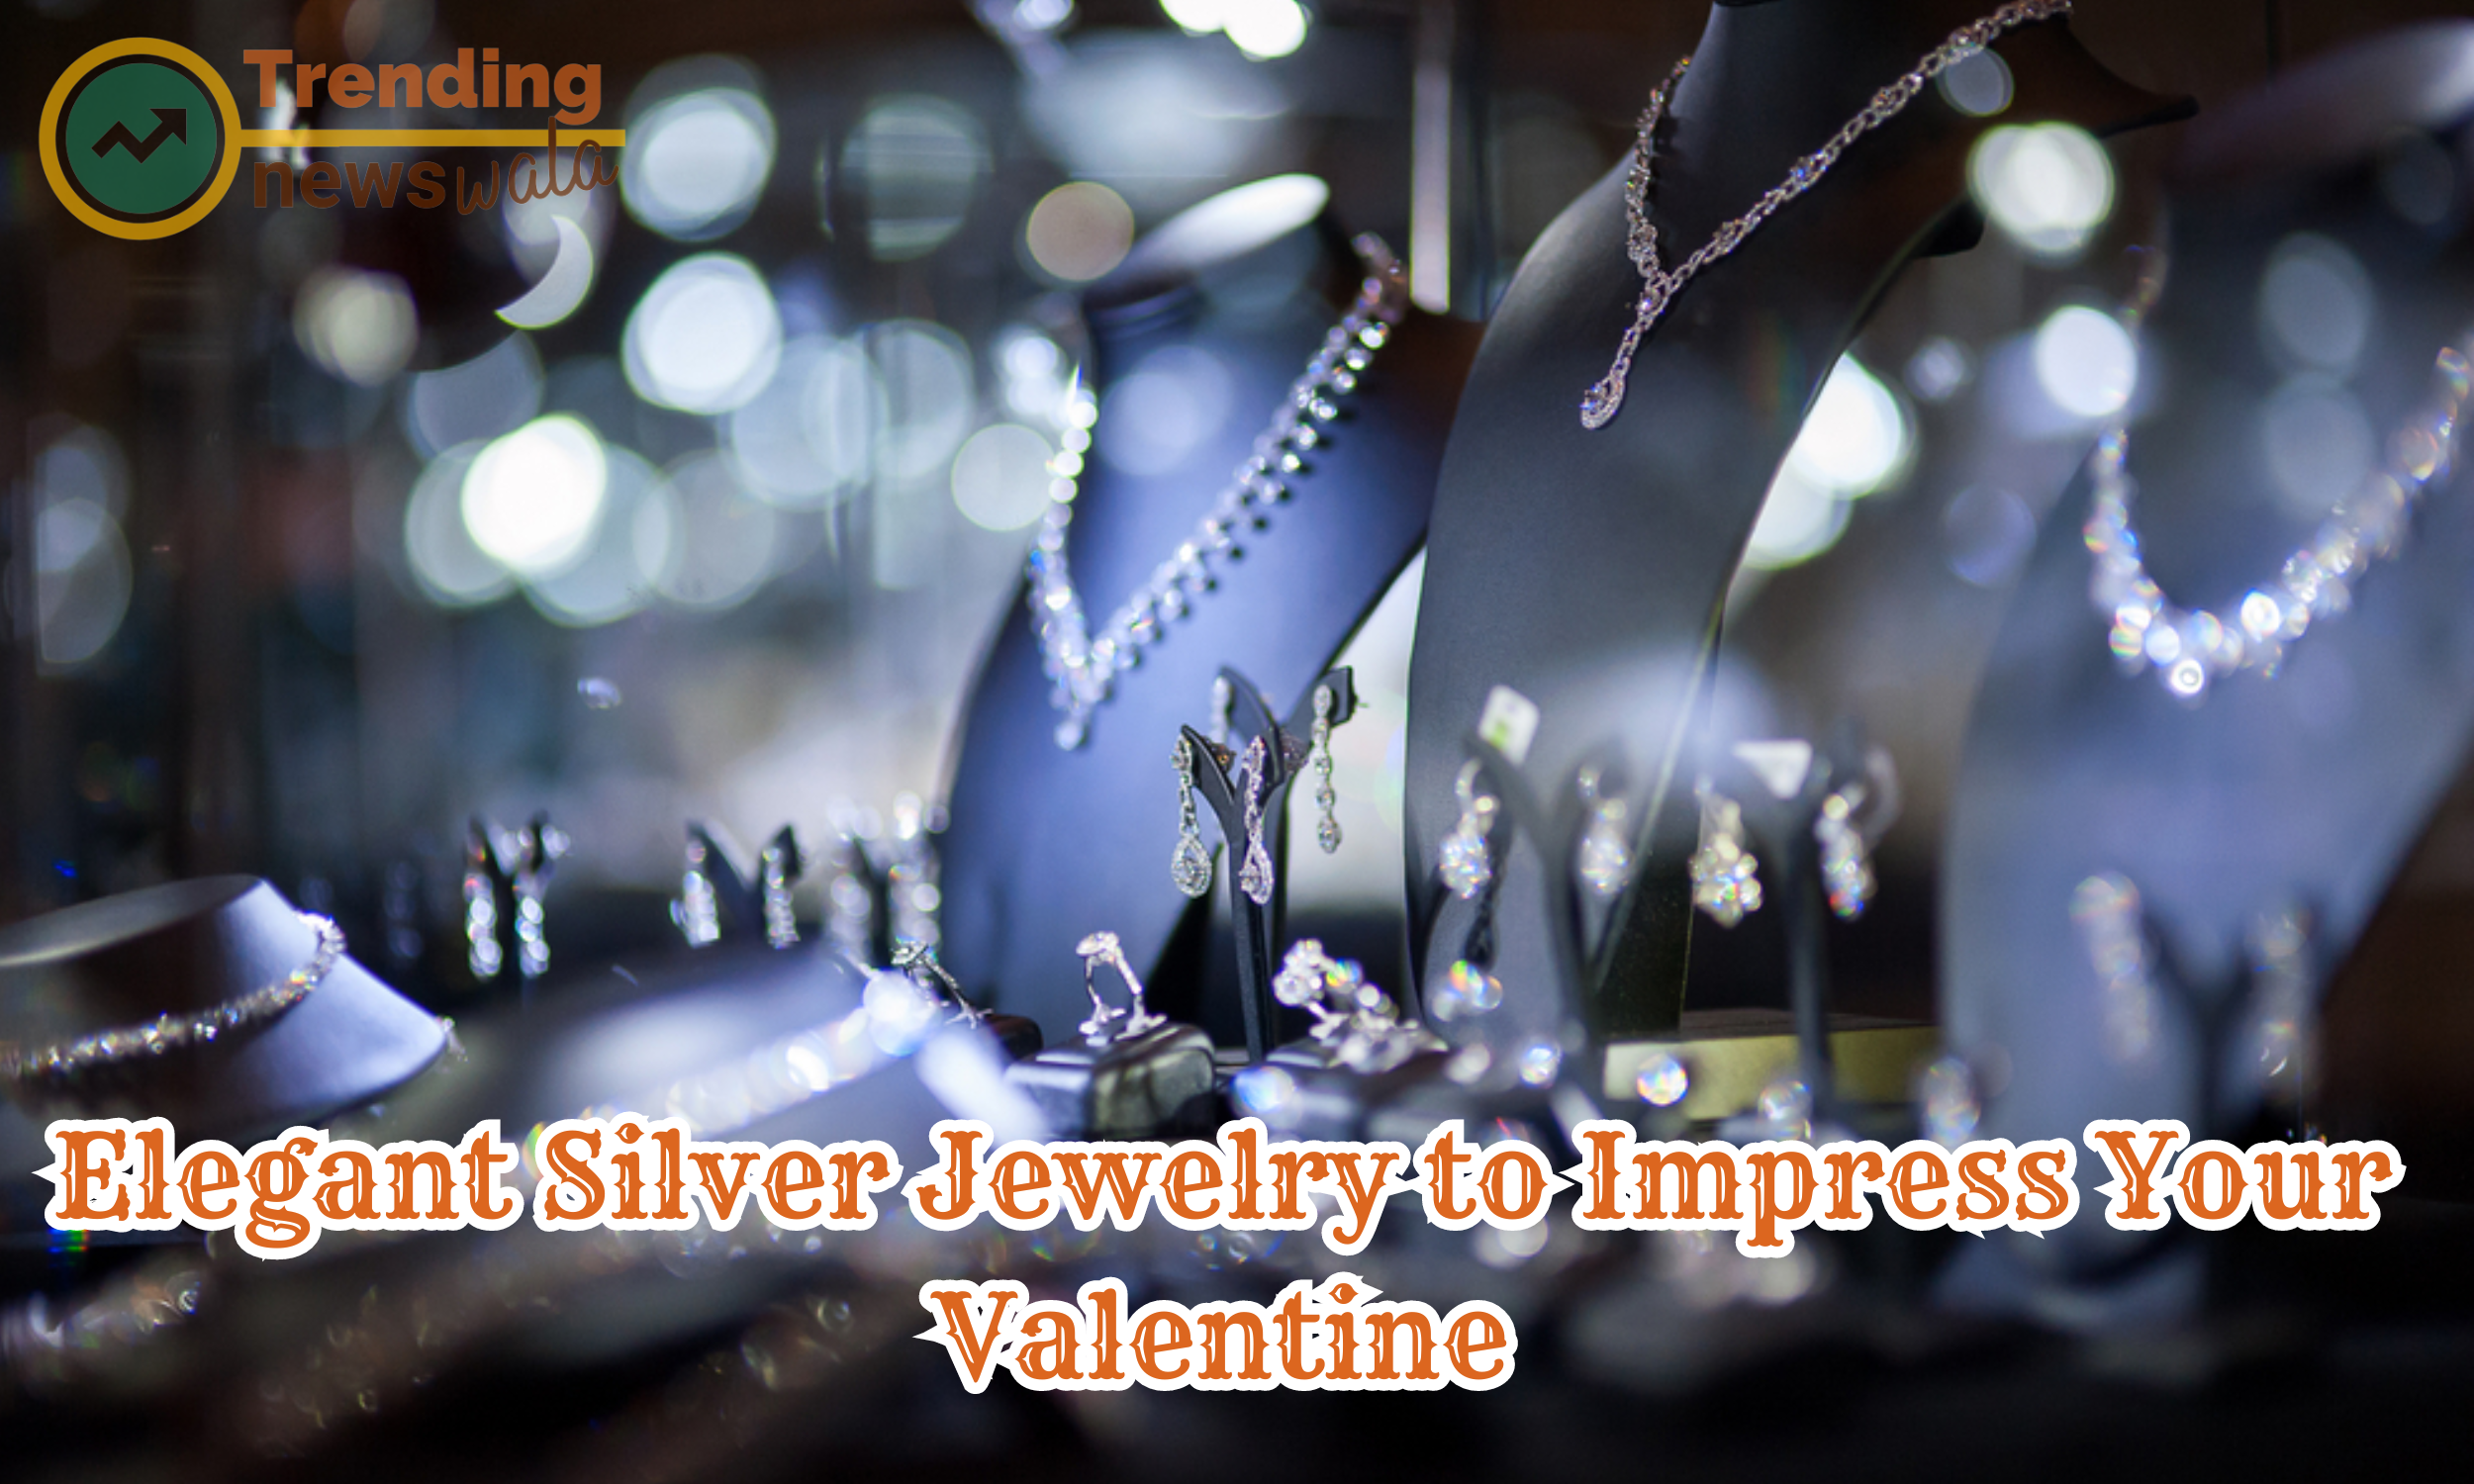 Elegant silver jewelry has the power to captivate and impress